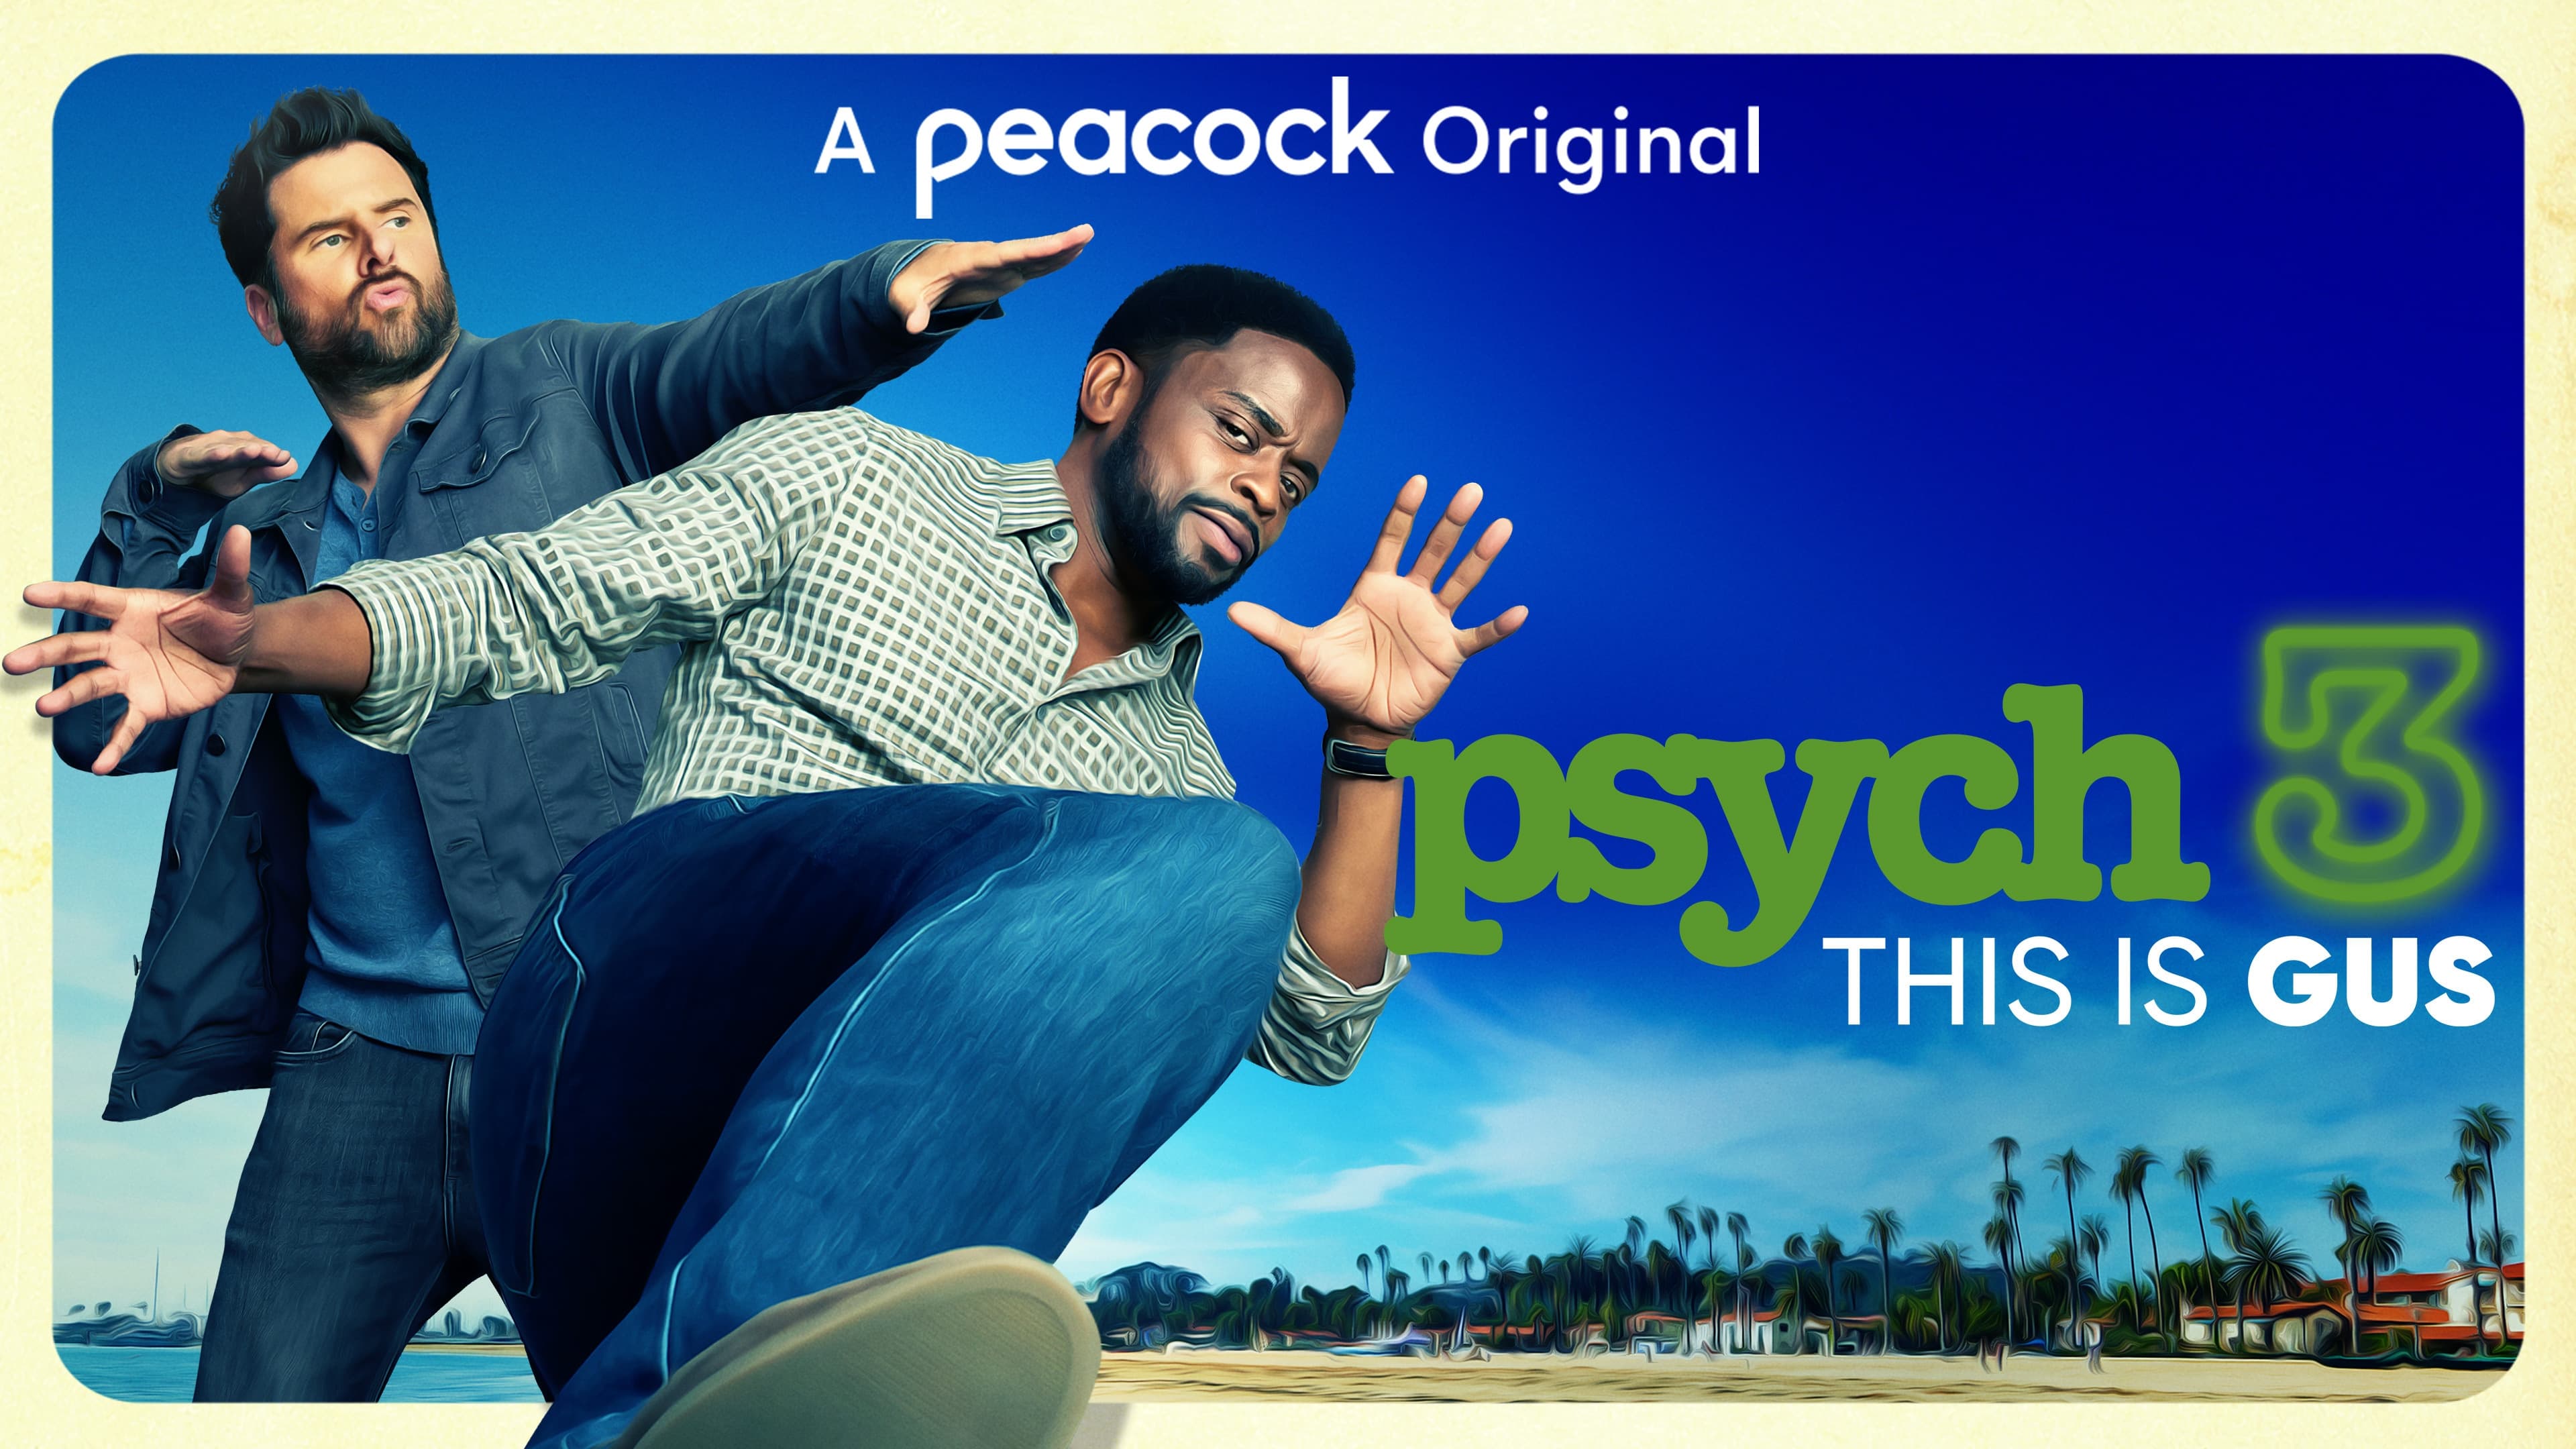 movie, psych 3: this is gus, dulé hill, gus (psych), james roday rodriguez, shawn spencer